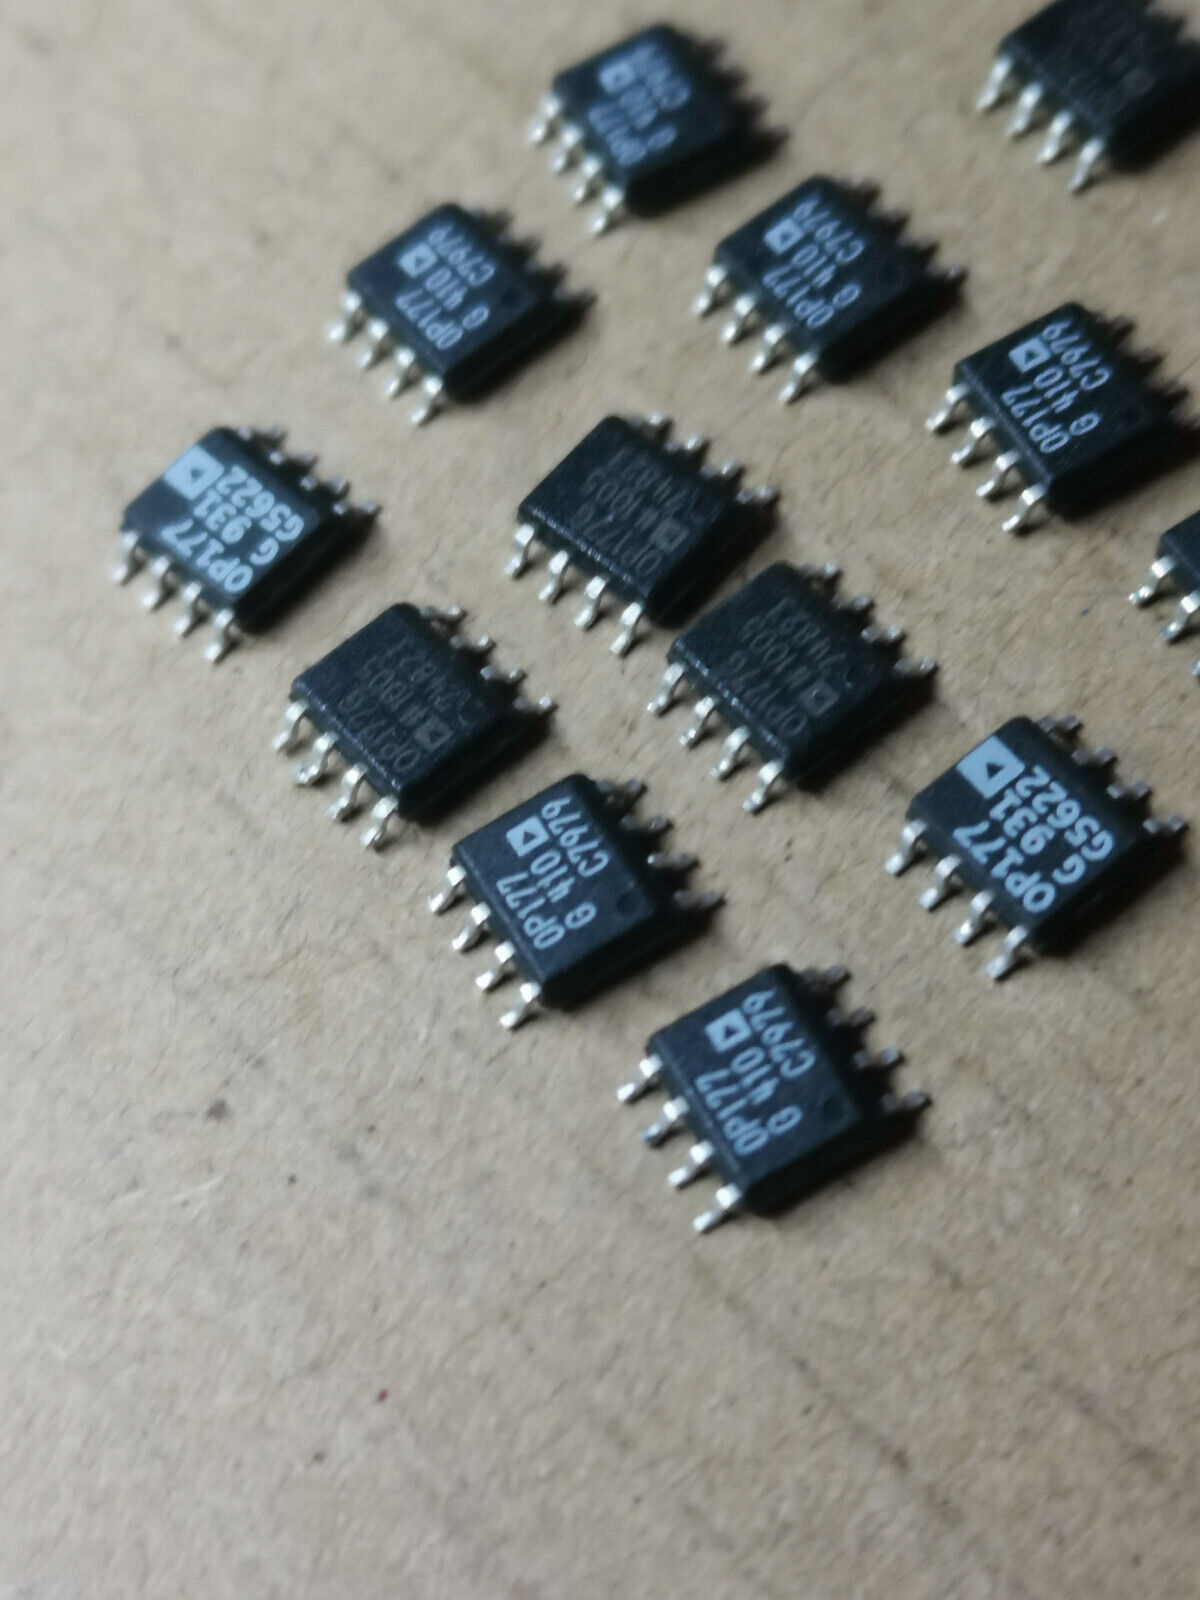 13pcs Genuine PMI OP177G Ultra Low Offset Precision Operational Amplifier